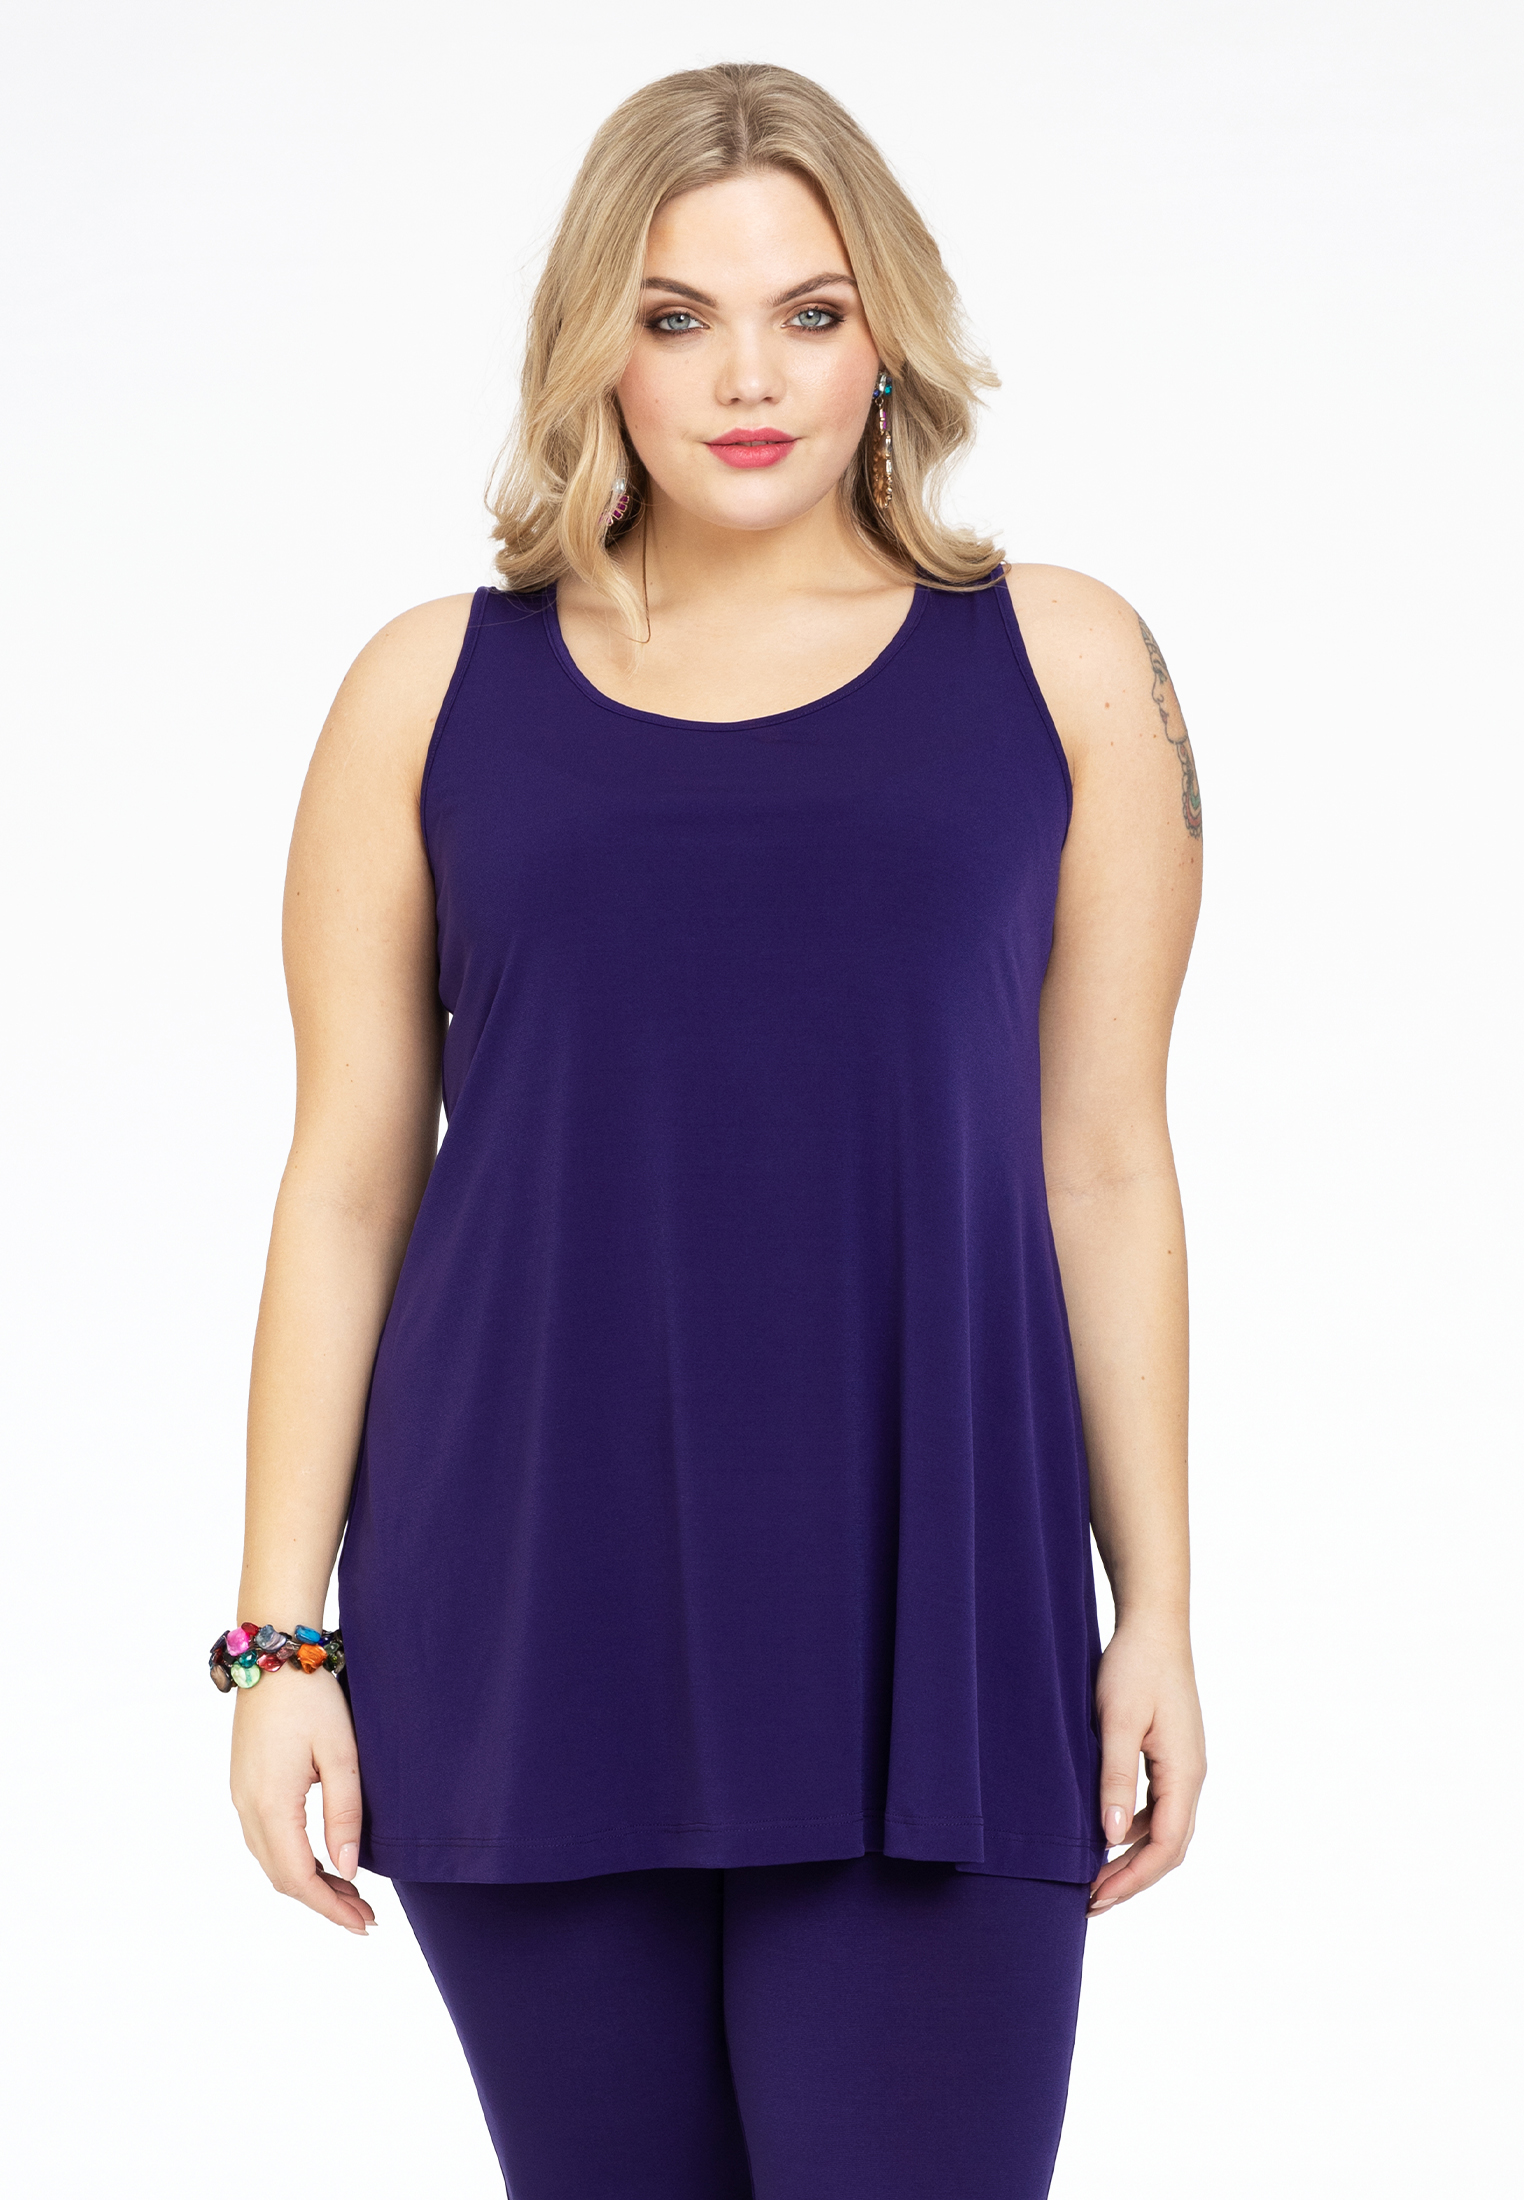 Top flare DOLCE 42/44 purple